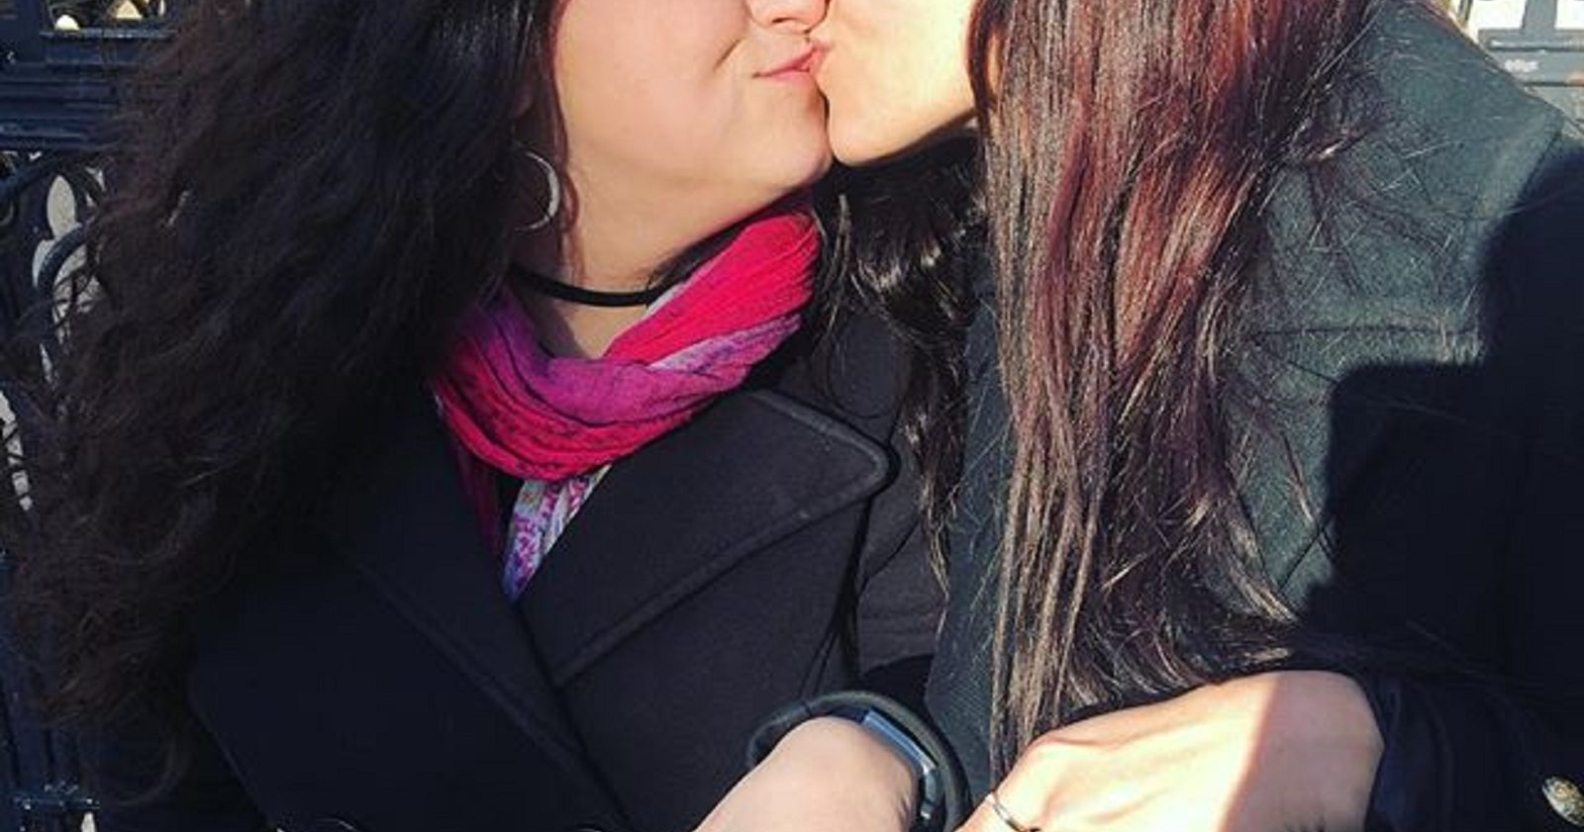 Lesbian YouTube star Chrissy Chambers wins 'revenge porn' case against ex- boyfriend, gets engaged to celebrate | PinkNews